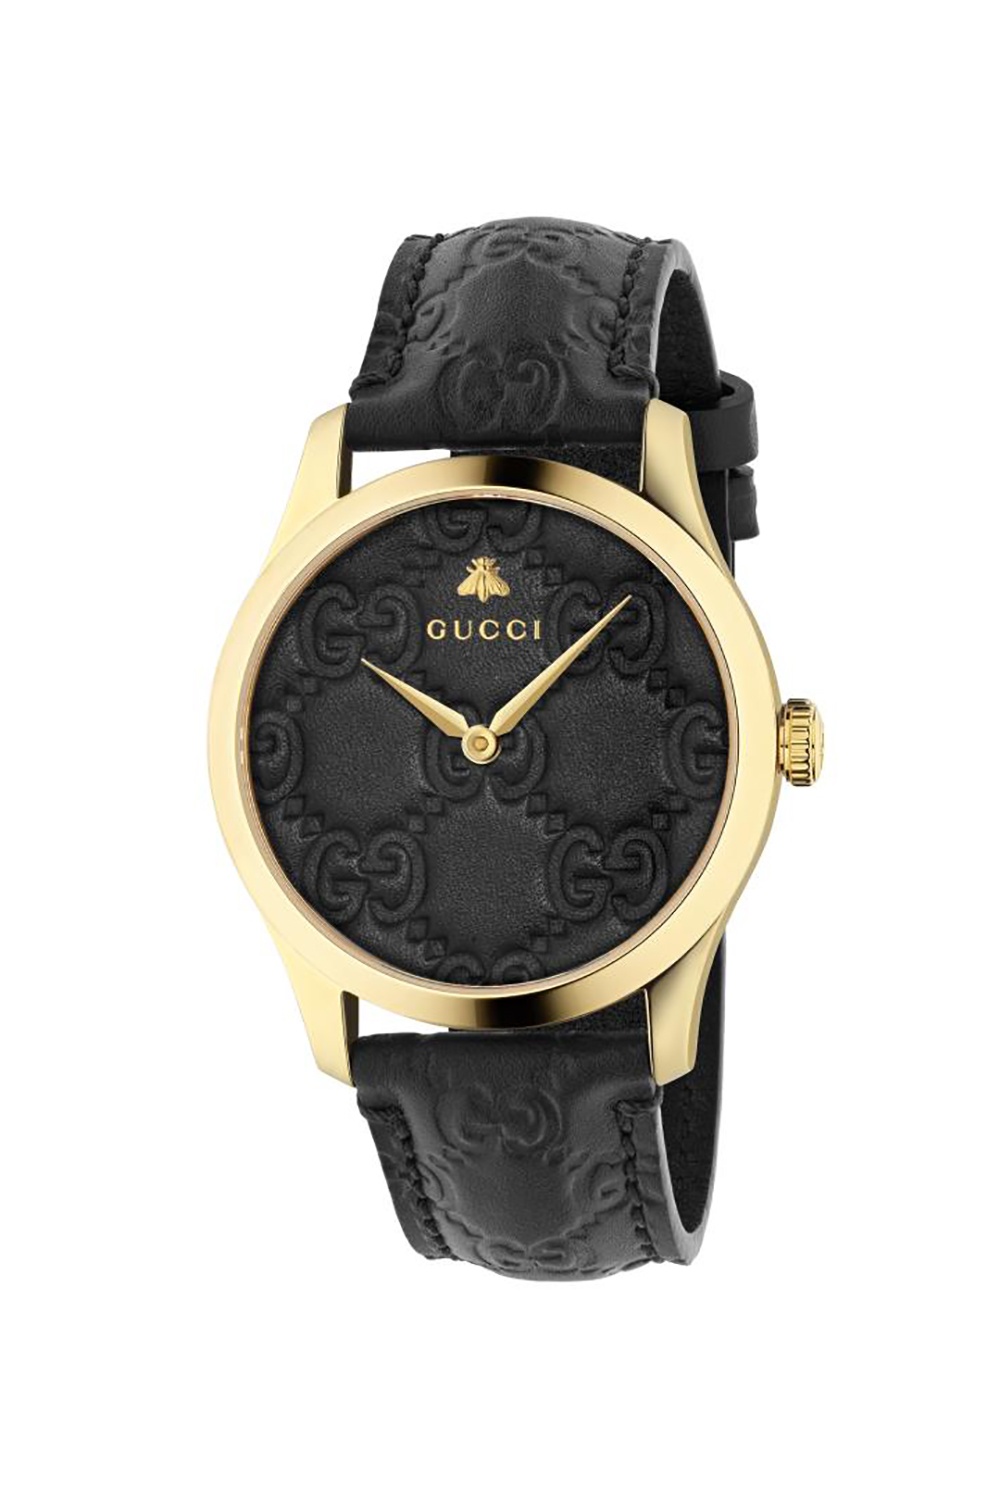 gucci While ‘G-Timeless’ watch